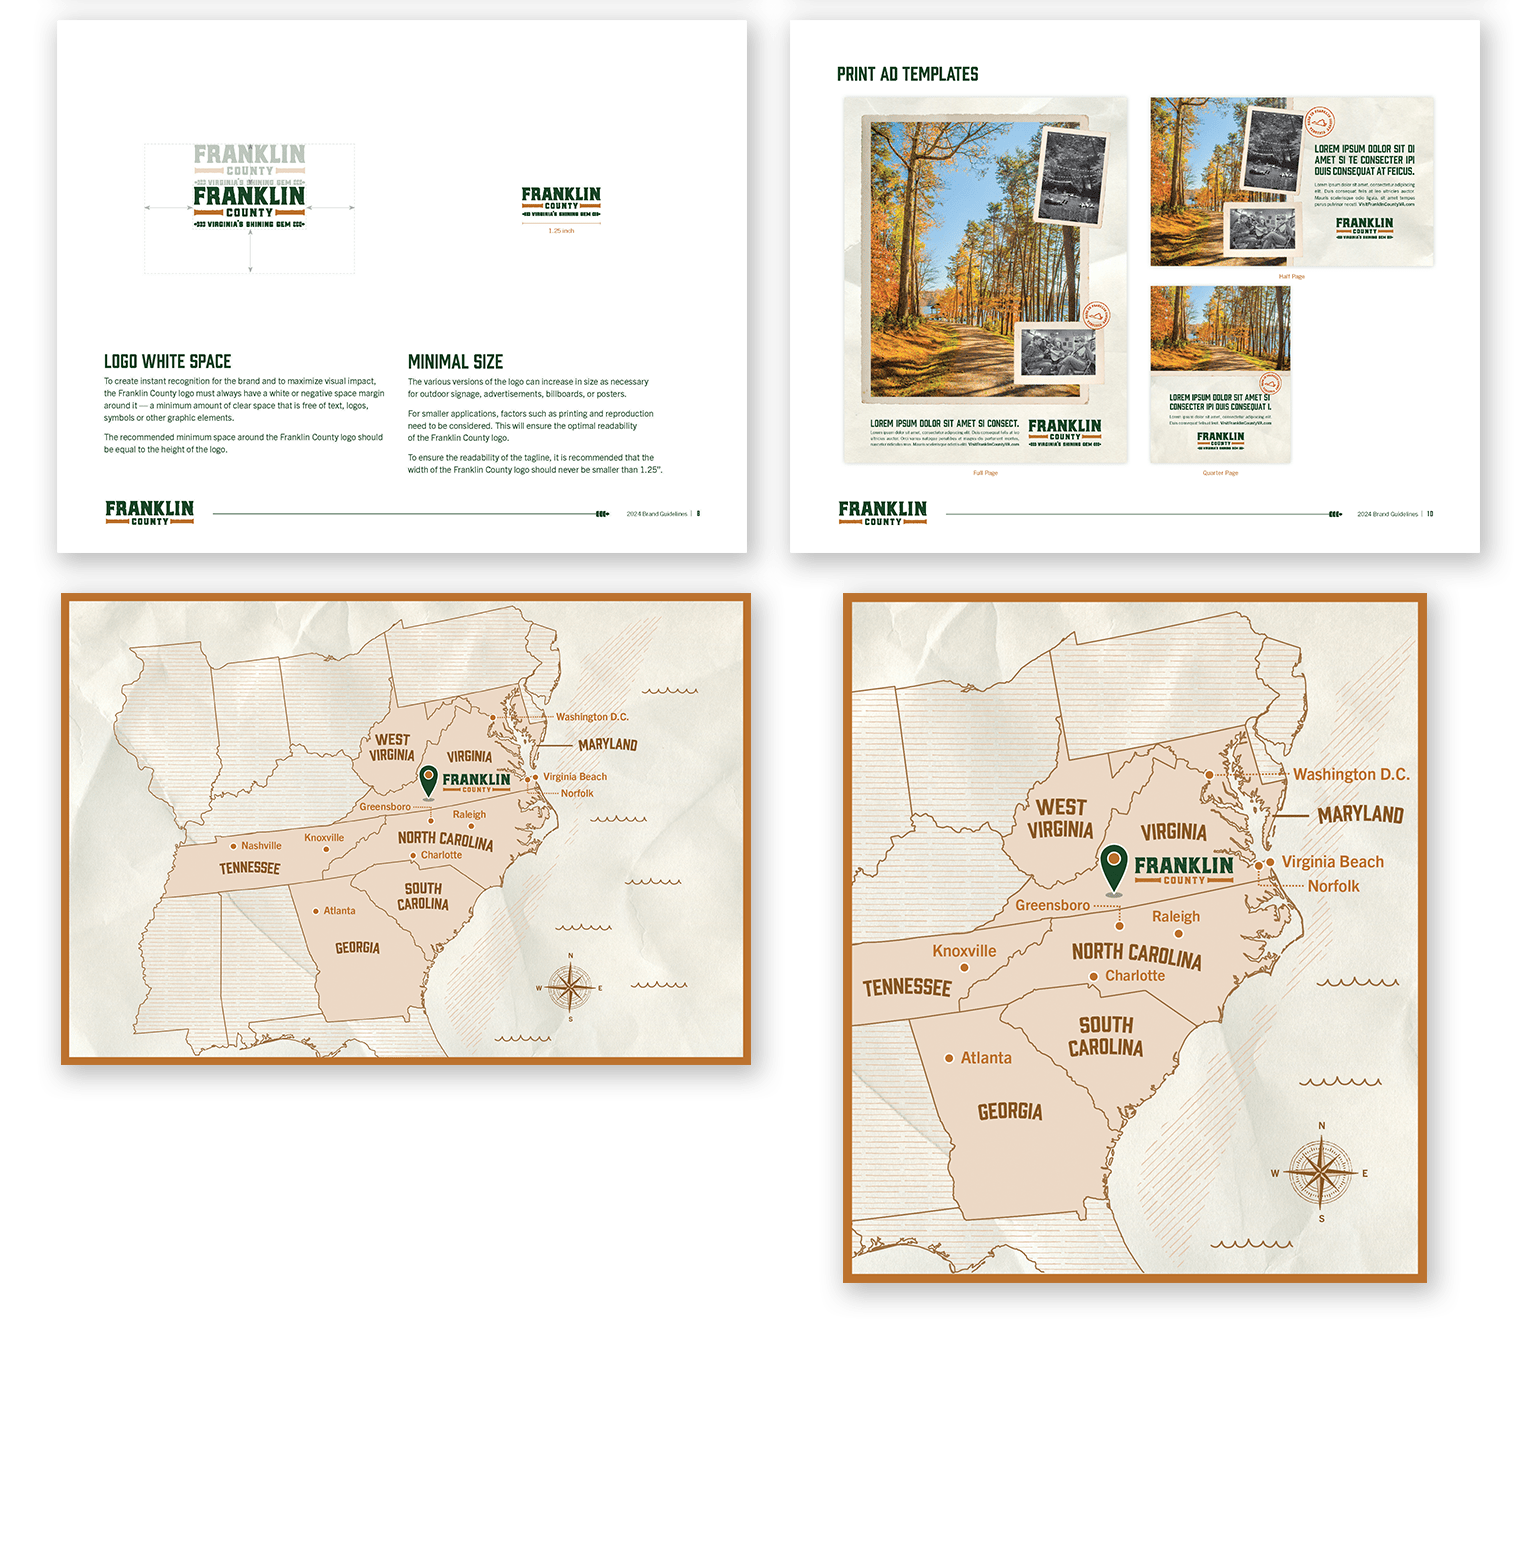 Franklin County case study with print ads and map